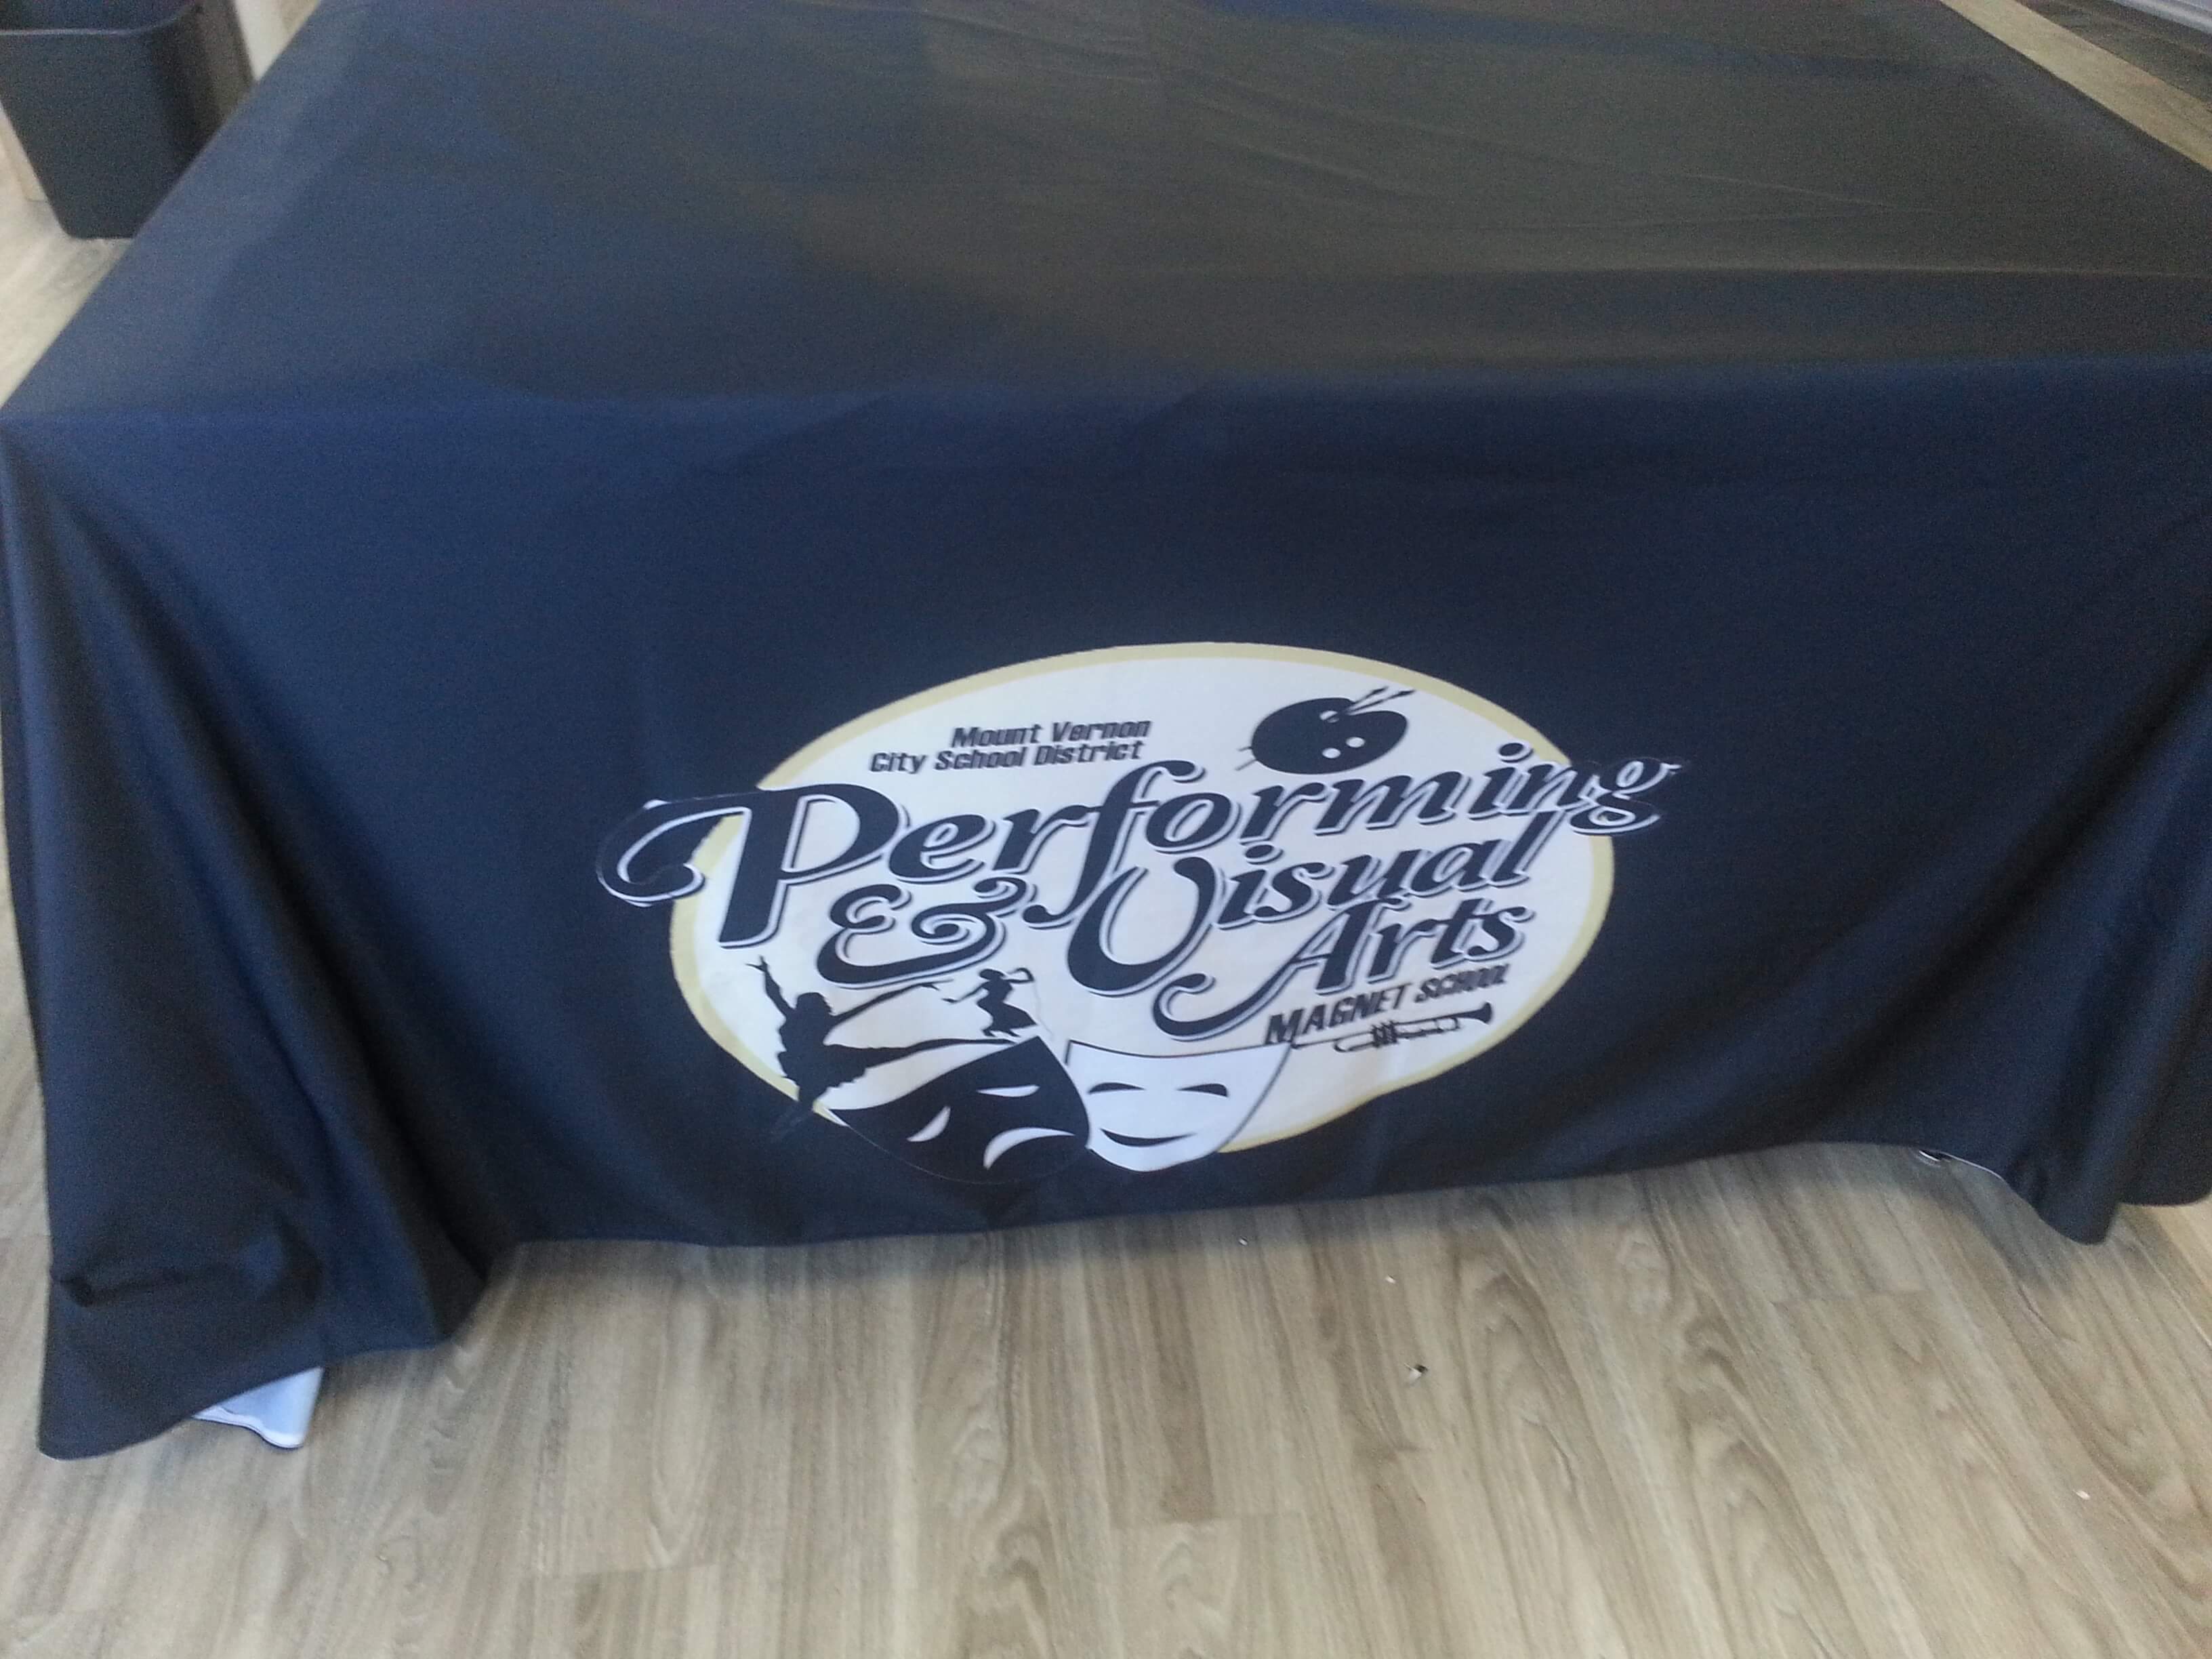 Mount Vernon City School District Performing & Visual Arts Table Cover